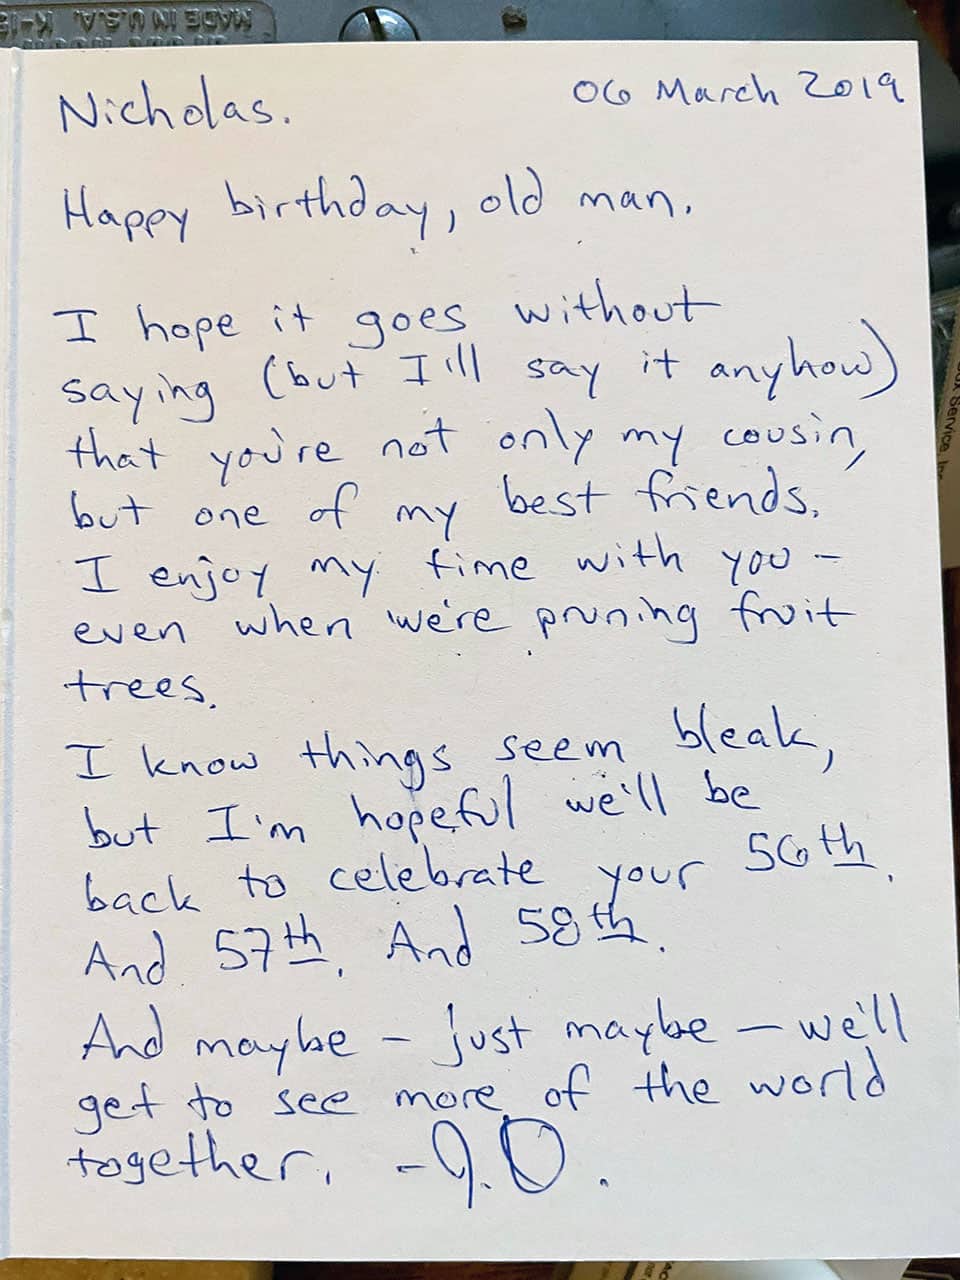 Birthday card for Nick's 55th